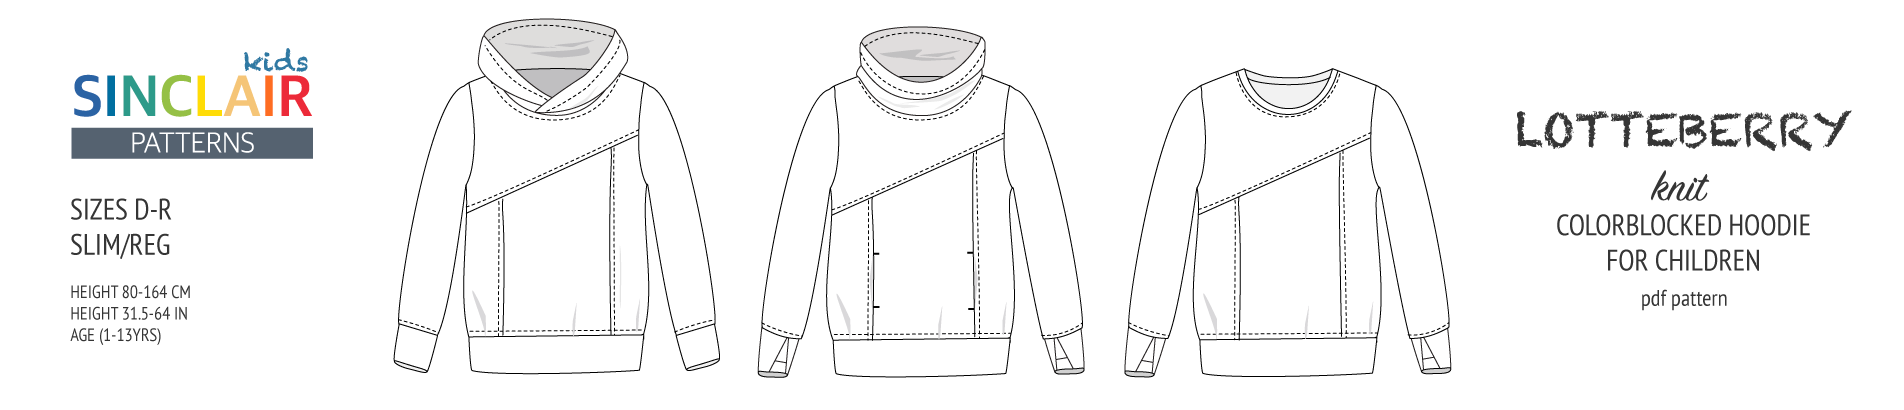 Lotte Lotteberry colorblocked hoodie for children (pdf sewing pattern)